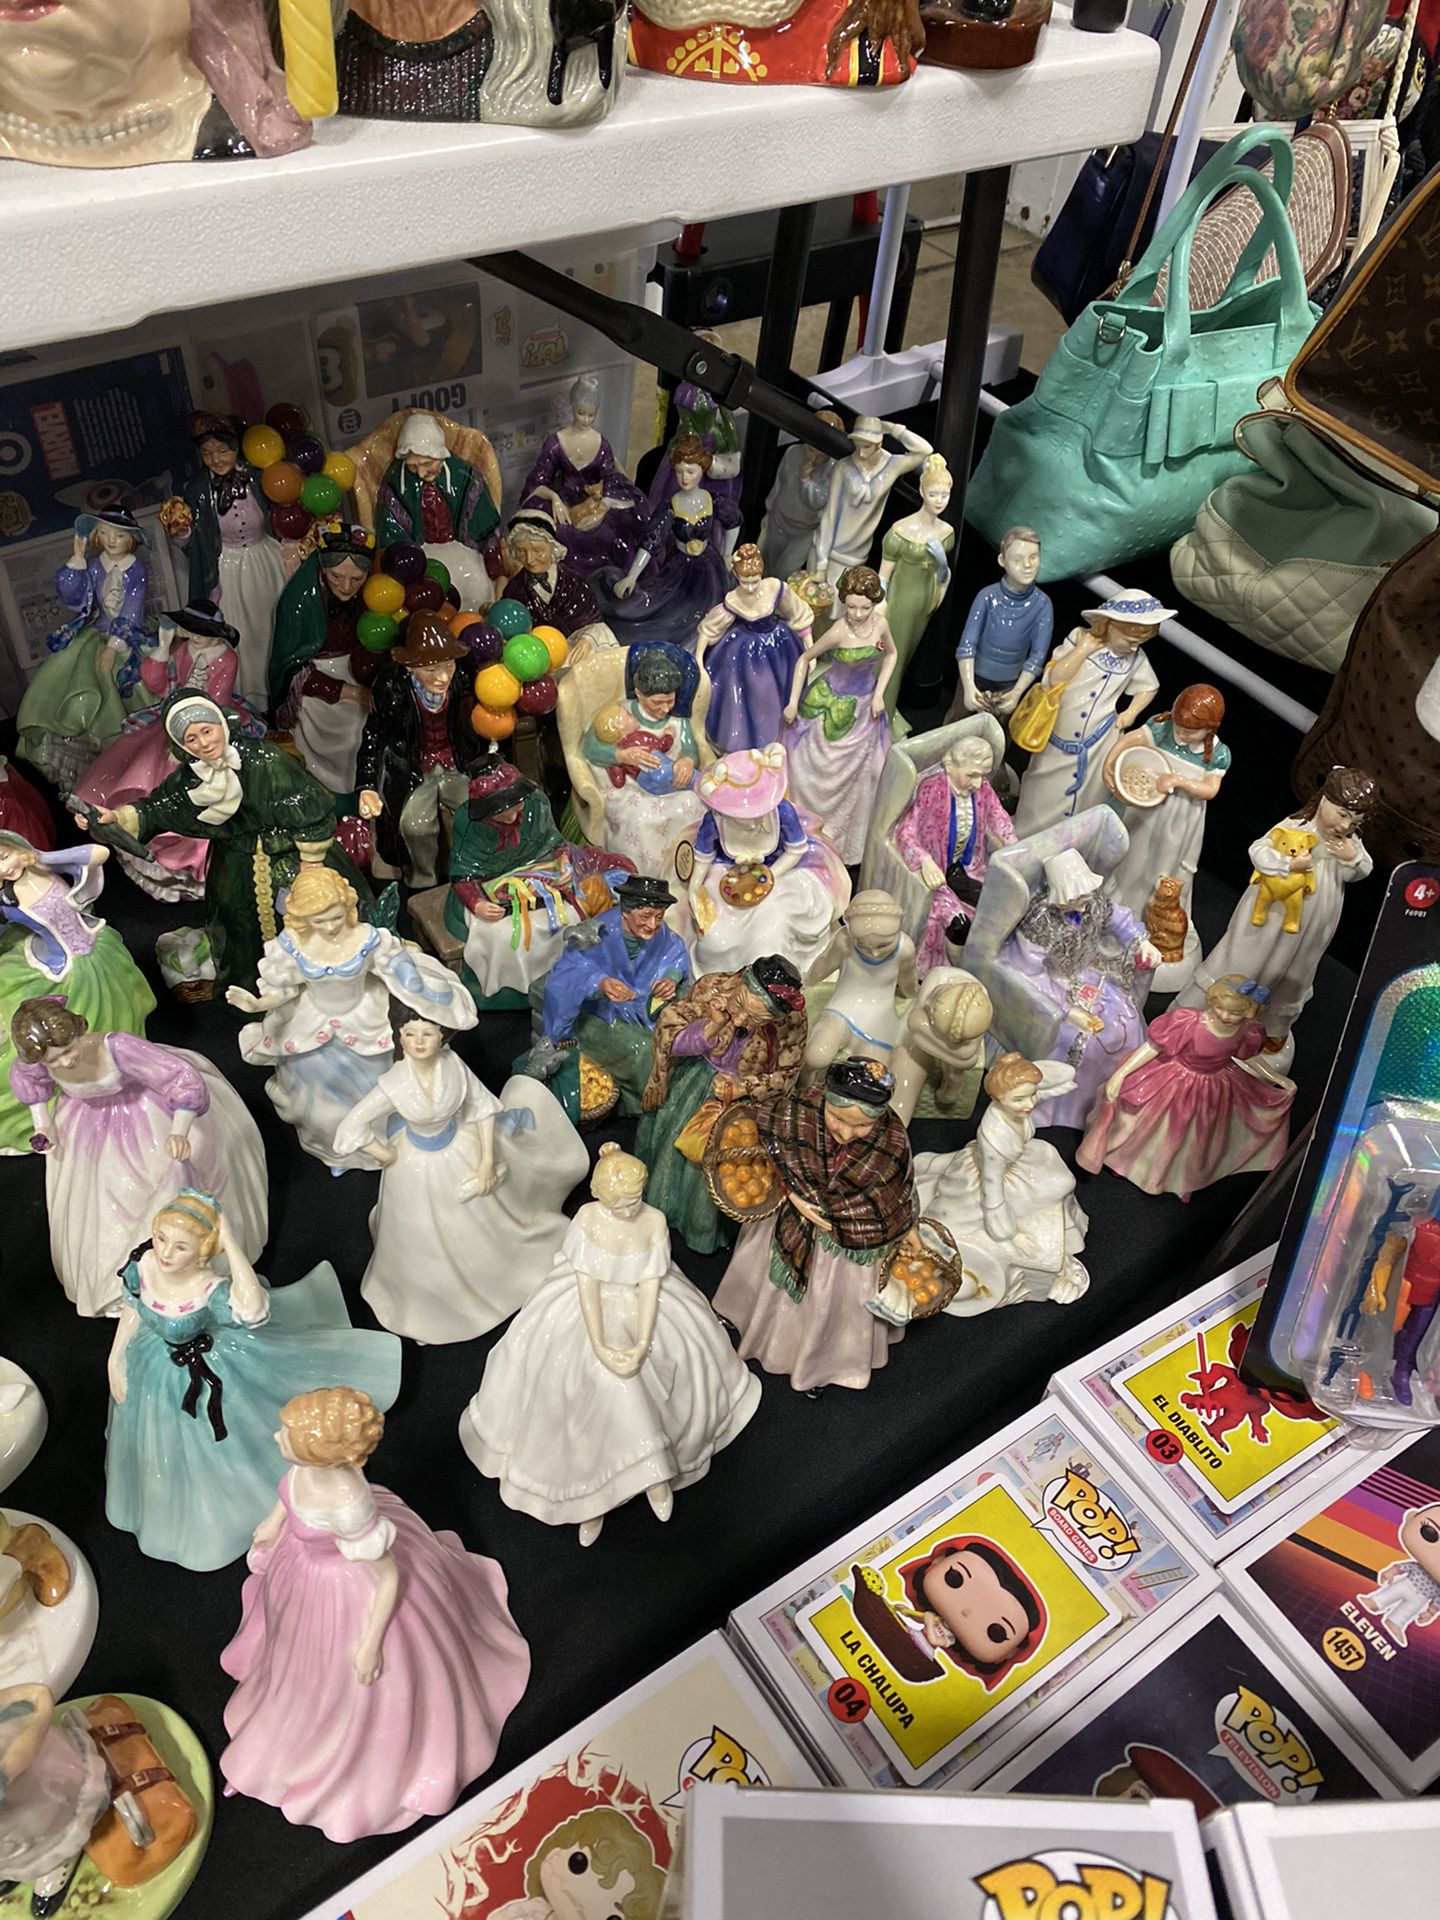 Royal Doulton Full Size Figurines (Xmas Special) $40 Each, 2/$75, 3/$100